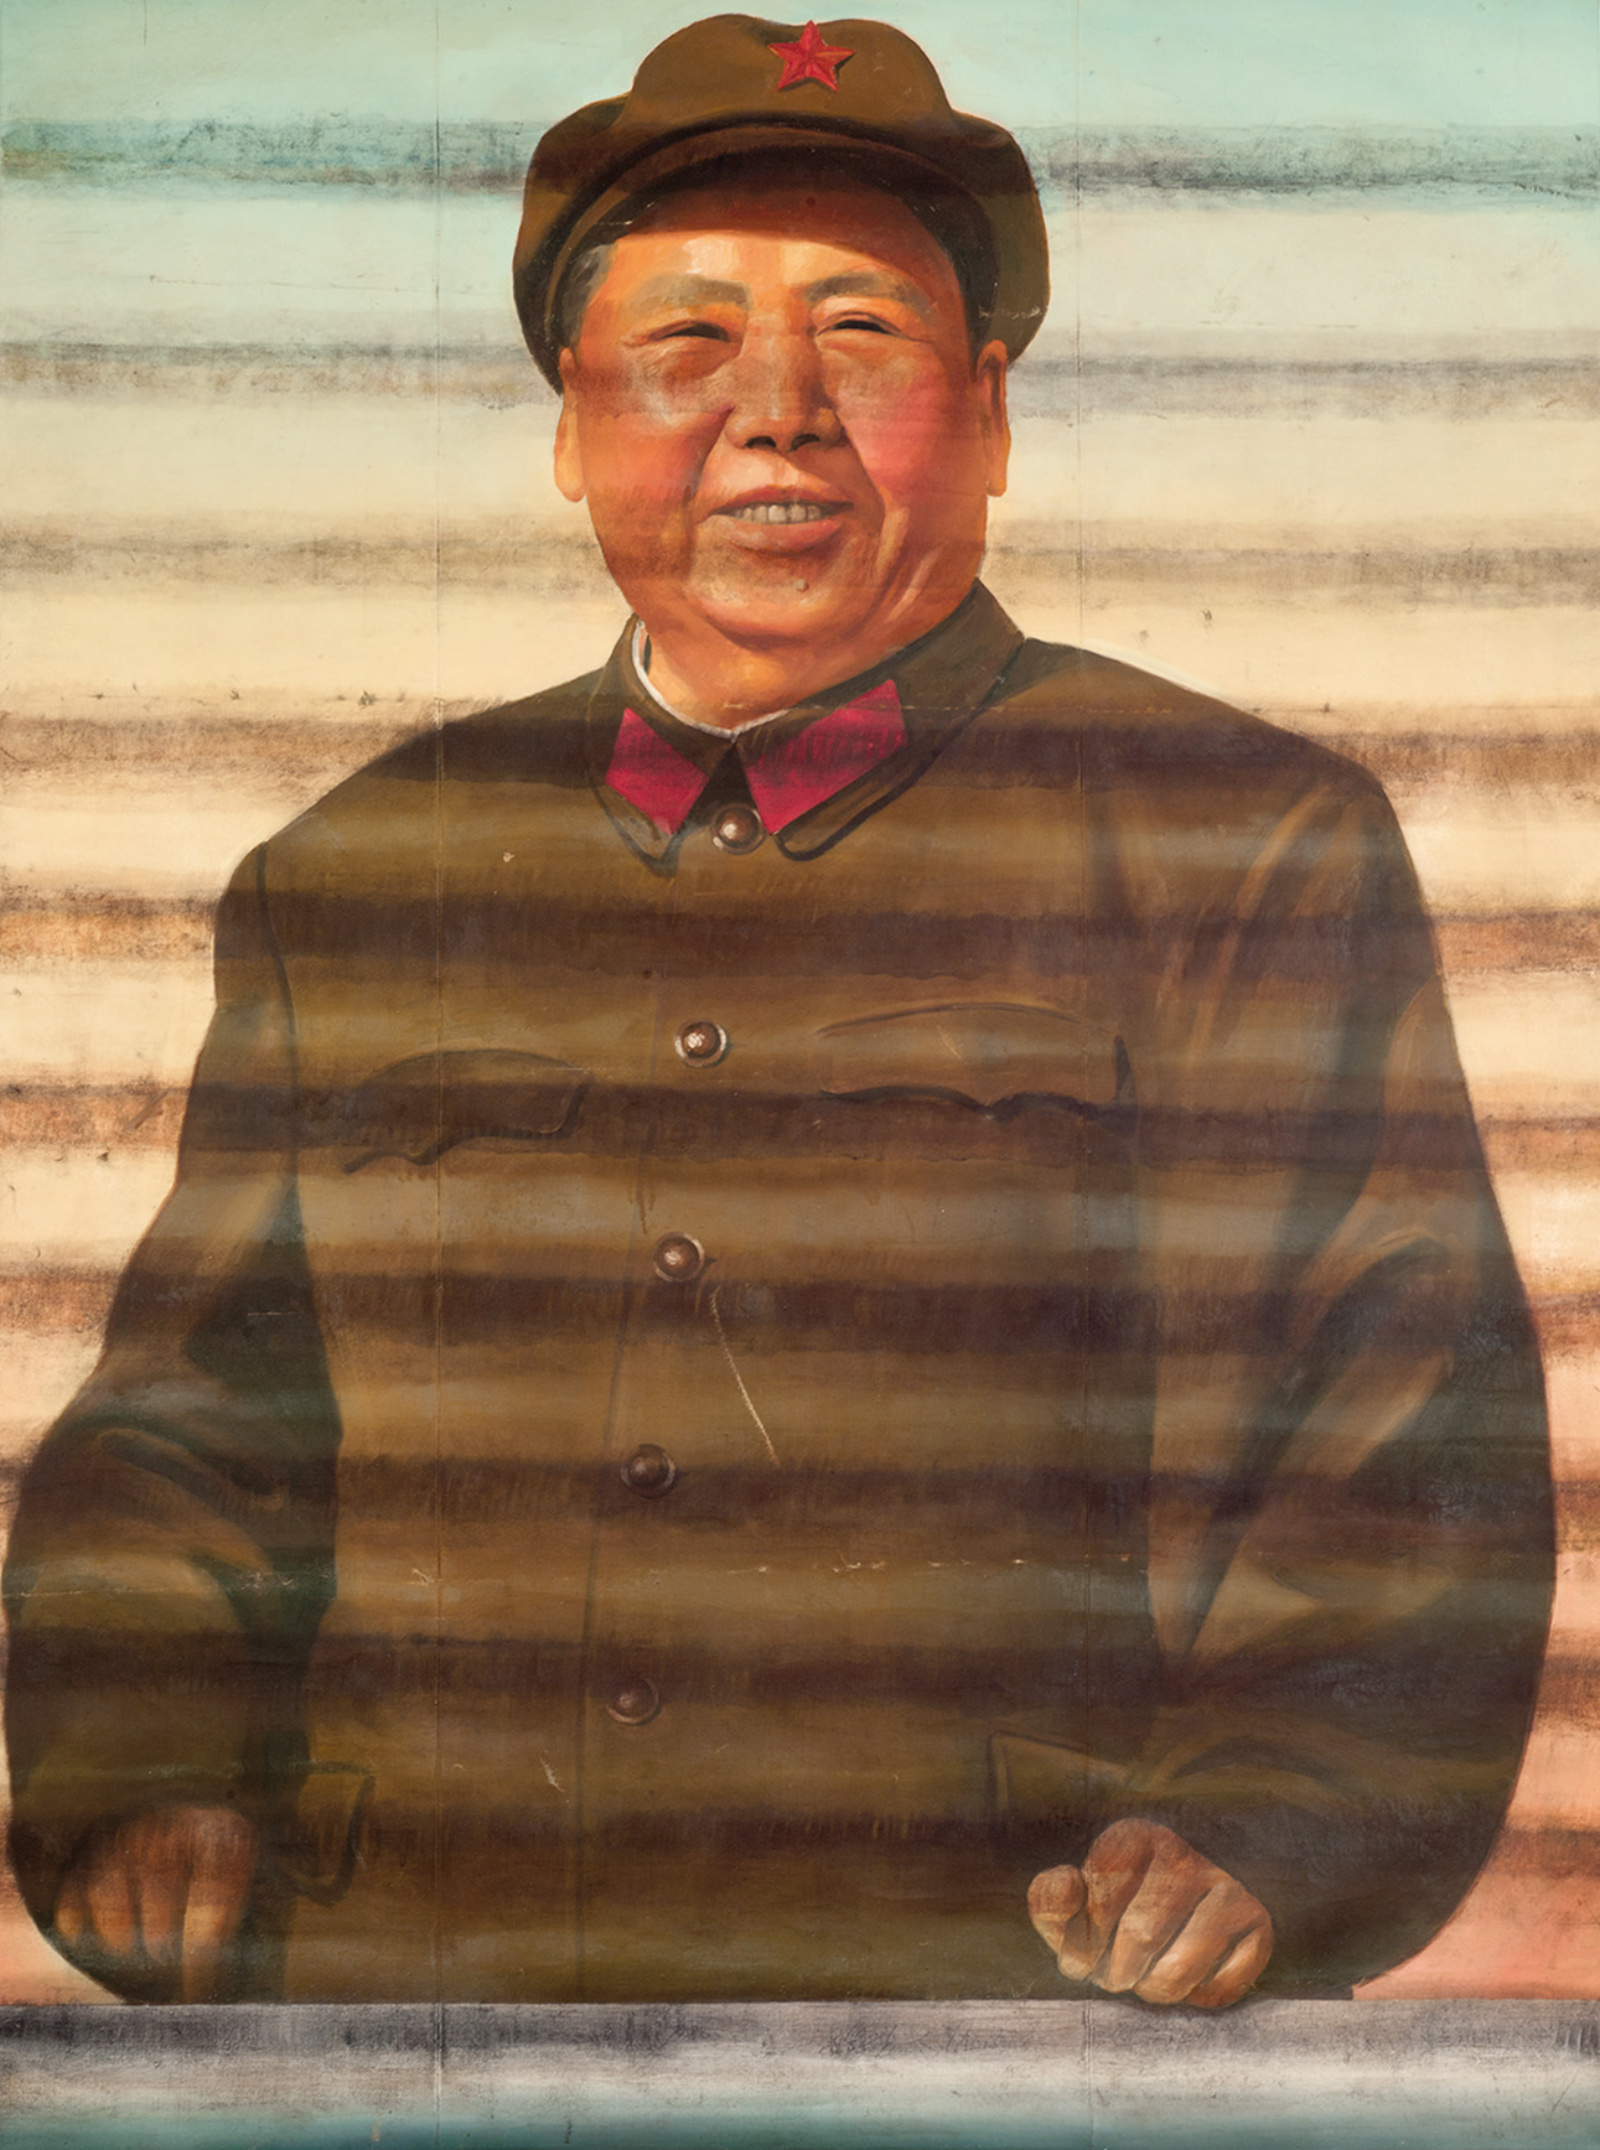 Ai Weiwei: Mao (Facing Forward), 1986; from the exhibition ‘Andy Warhol/Ai Weiwei,’ which originated at the National Gallery of Victoria, Melbourne, and will be at the Andy Warhol Museum, Pittsburgh, June 4–August 28, 2016. The catalog is edited by Max Delany and Eric Shiner and published by Yale University Press.